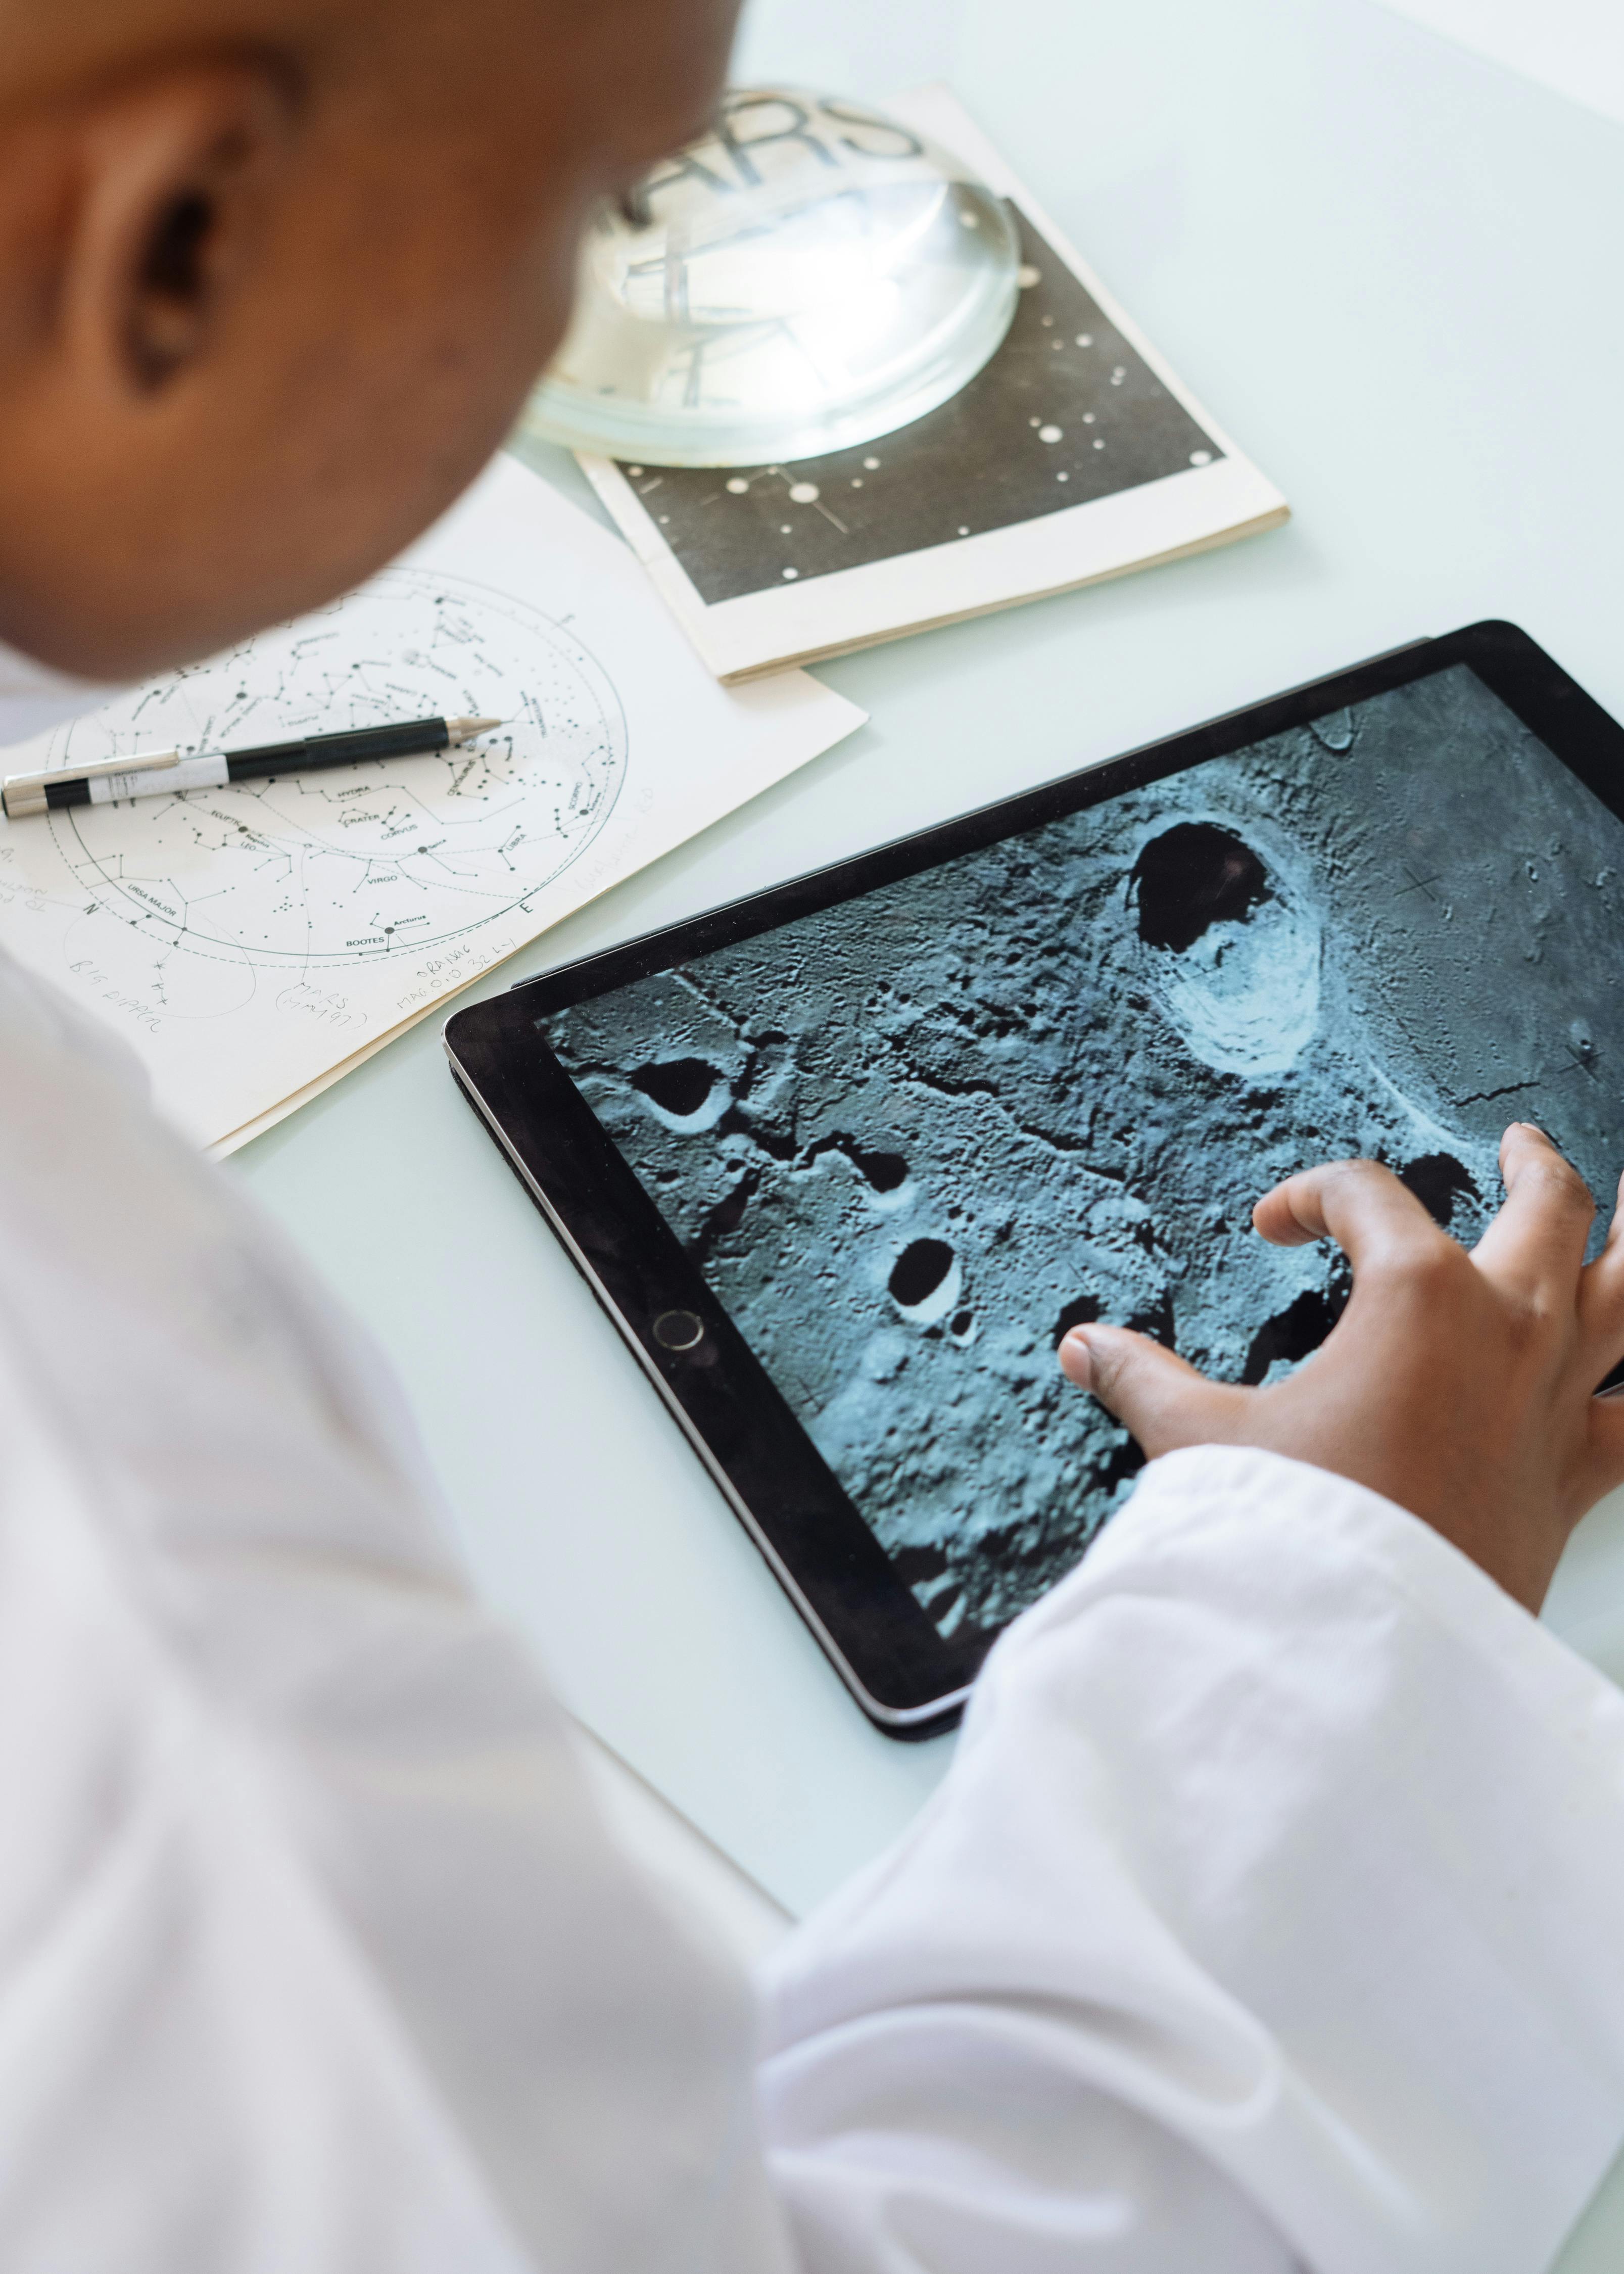 crop astrophysicist exploring surface of moon while using tablet in university